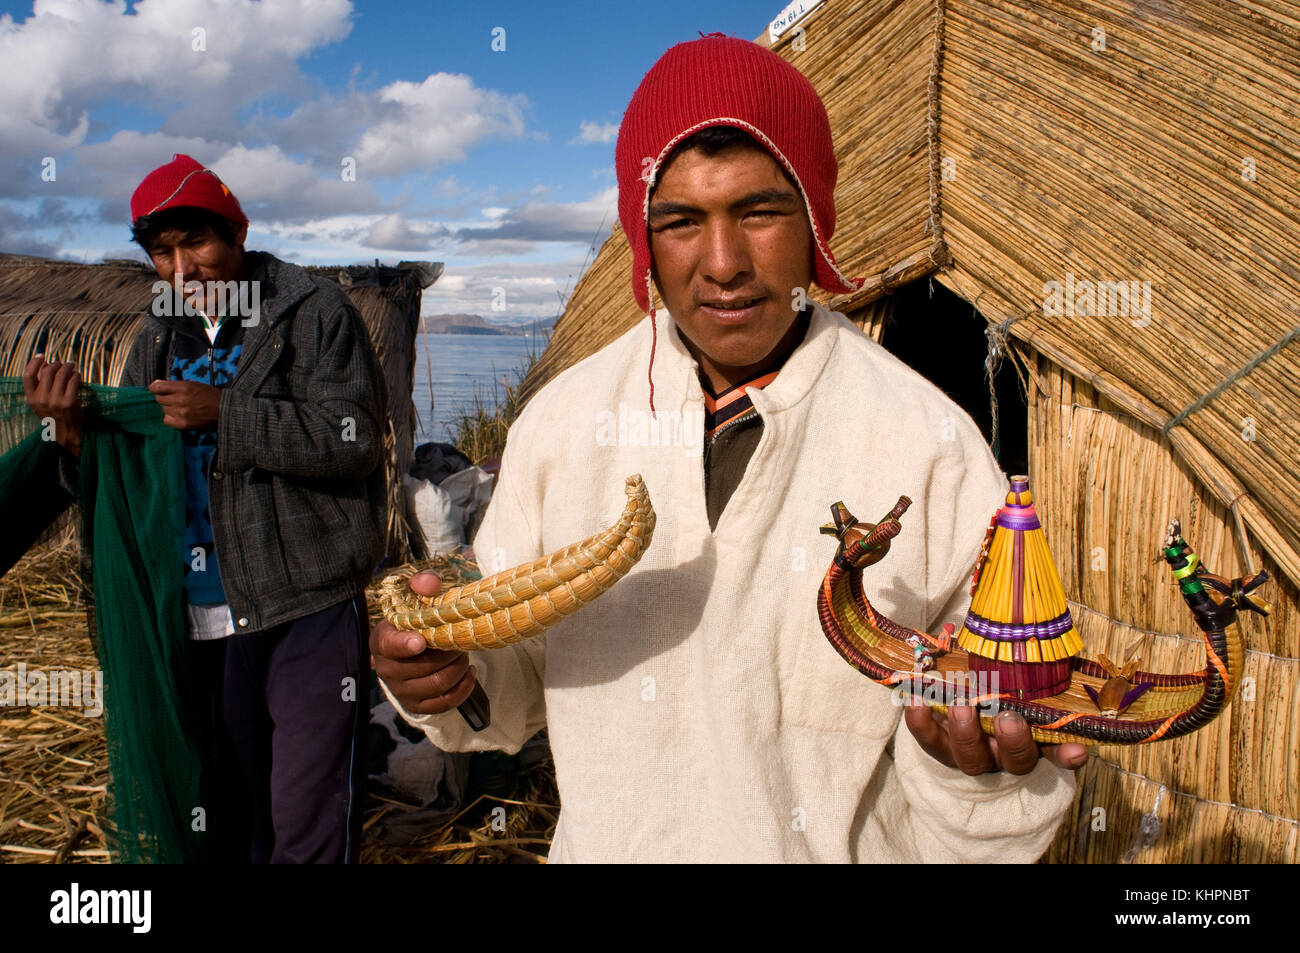 Uros Island, Lake Titicaca, peru, South America. Traditionally, hunting and fishing were the basic mode of subsistence of the Uros, but with the promo Stock Photo